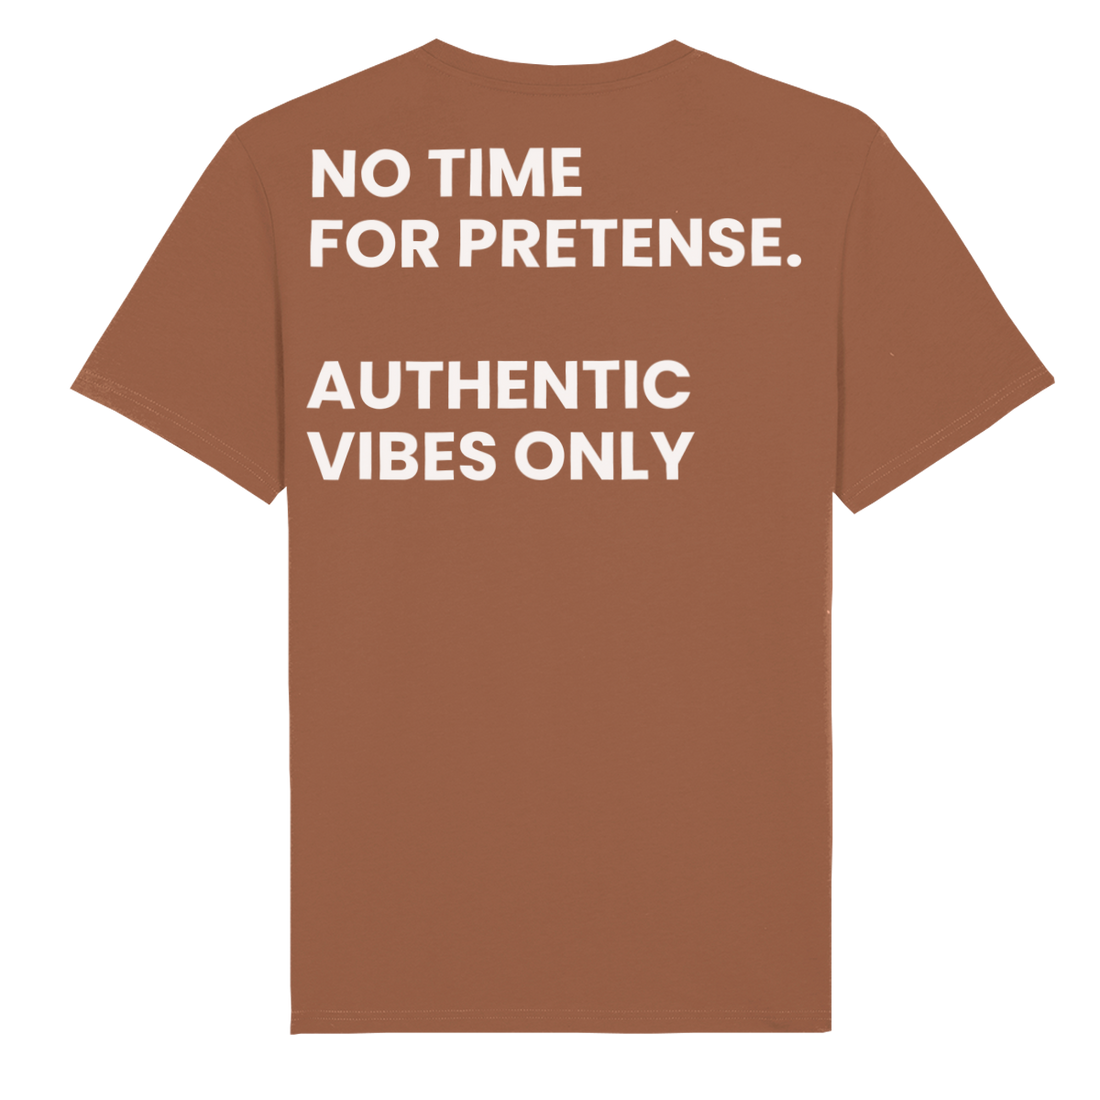 Authentic Vibes Only - T-Shirt